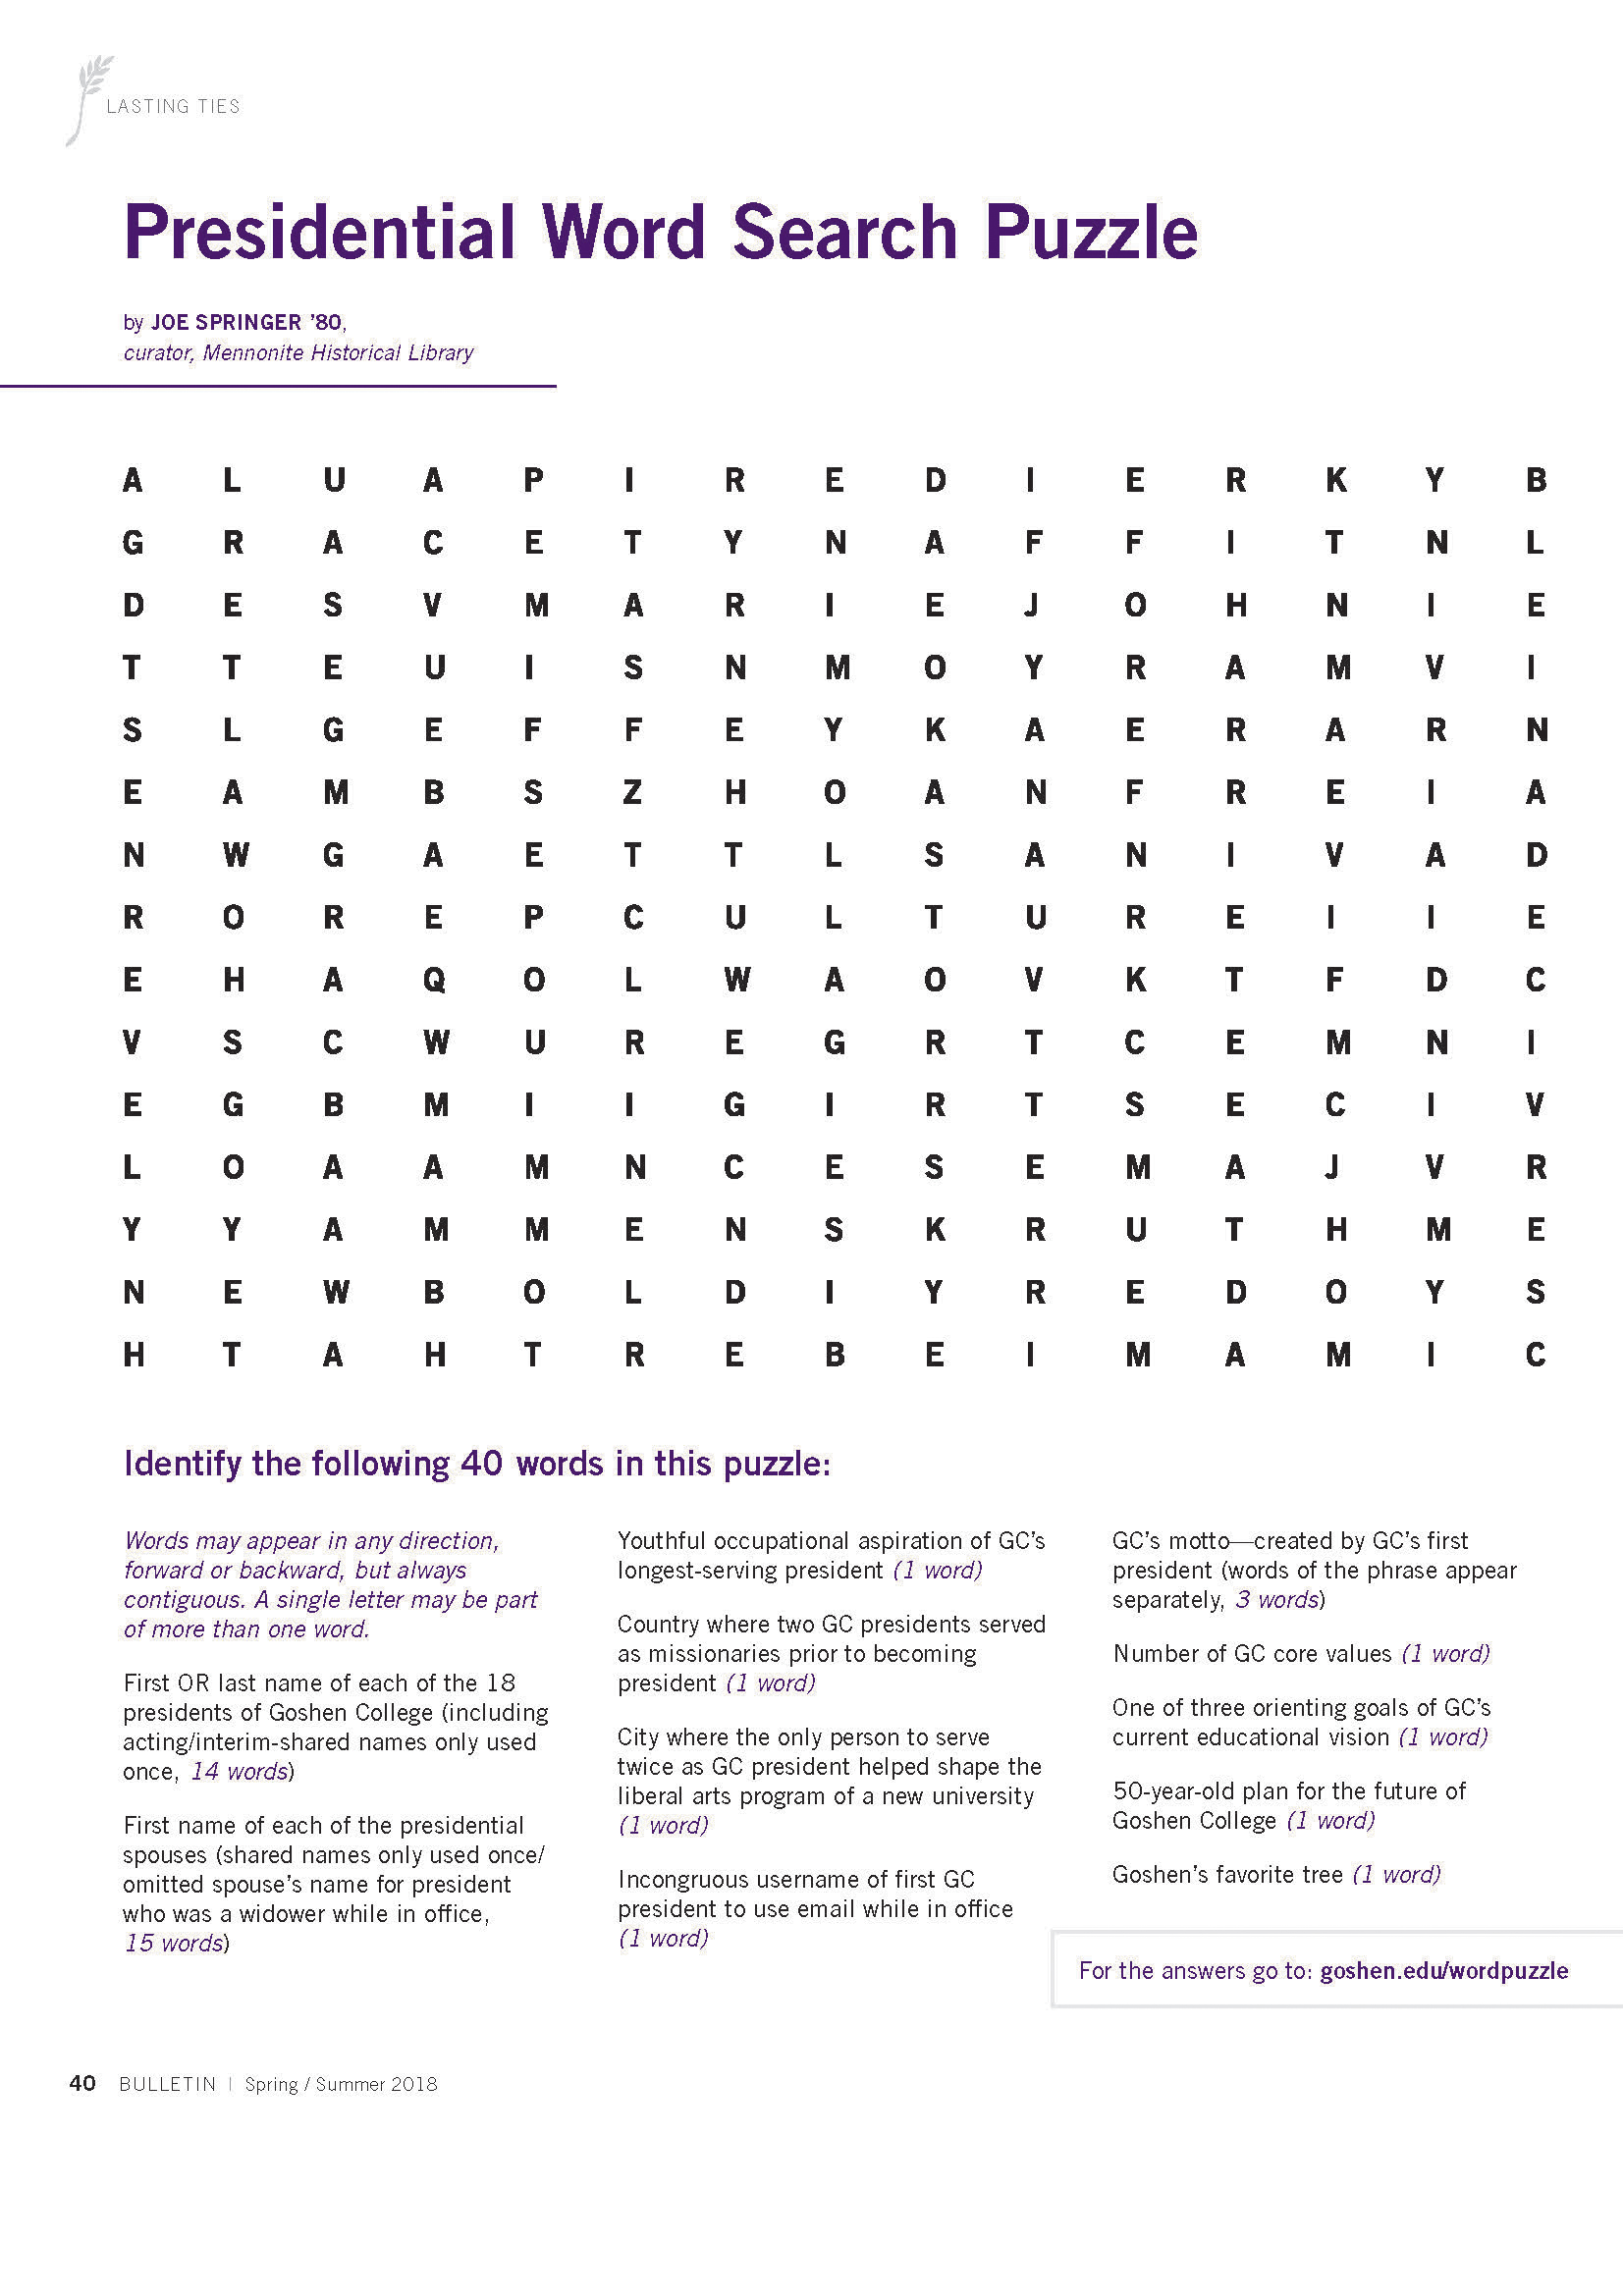 presidential-word-search-answers-goshen-college